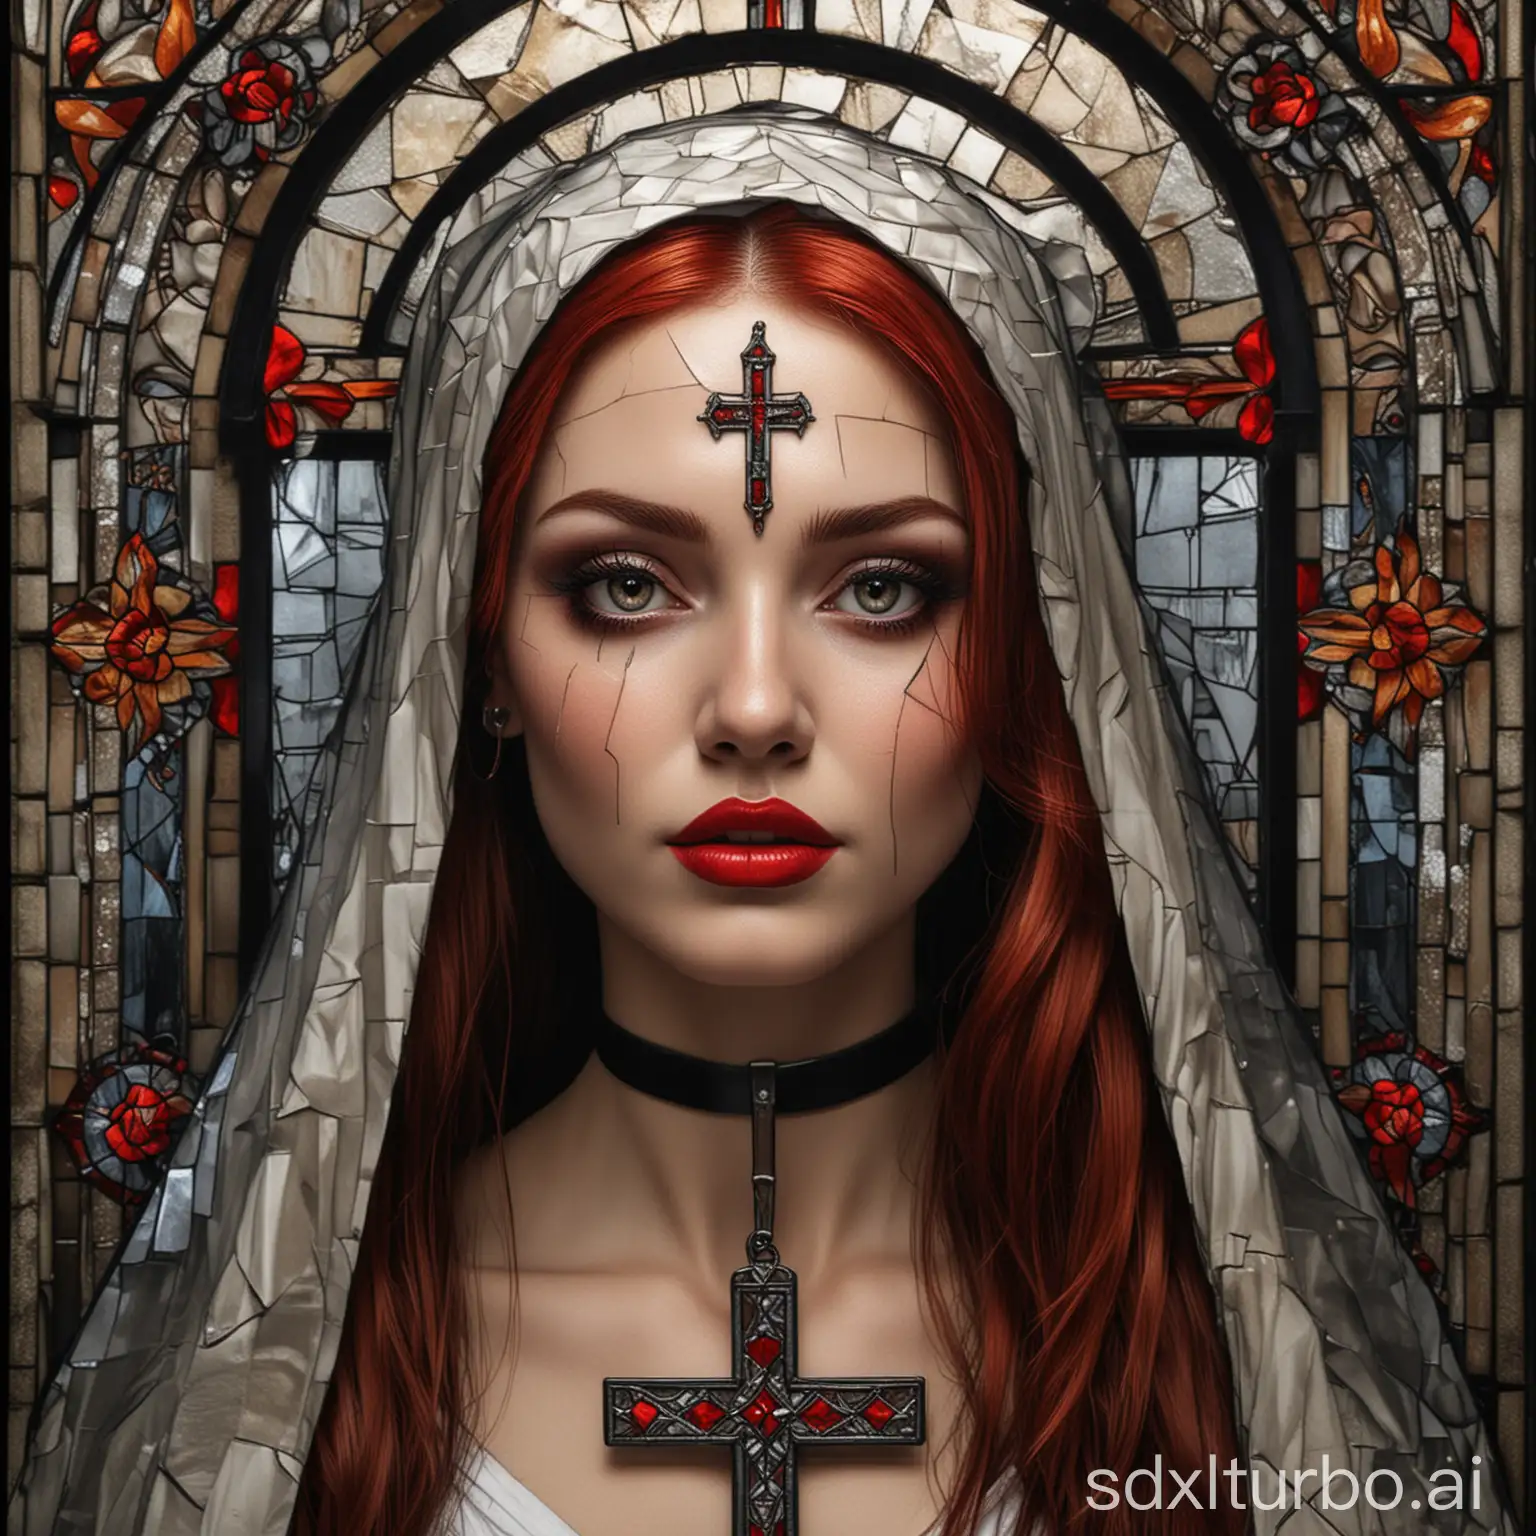 A full bodied mesmerizing pretty nun w/ long red hair&red holy tattoos,holding a titanium cross,wearing a banded hair scarf&red lipstick,in bg is a complex reflective mosaic made from stained glass window&jagged black glass.Her eyes have a captivating gaze,her lips painted in vivid hues that contrast beautifully against her skin tone.Designed by KarmaNinja Shards of light enhances her mysterious expression on her face.Lower right artist signature "A.Peltola"